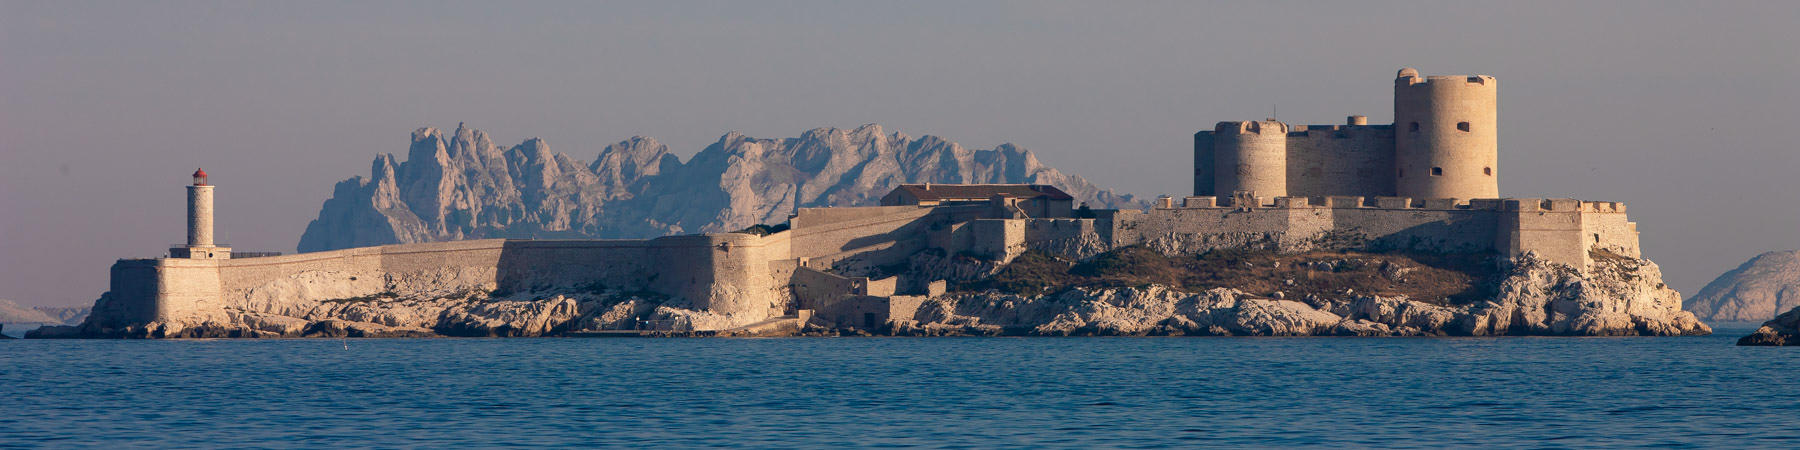 From Marseille to Hyères - Photo Pêcheur d'Images